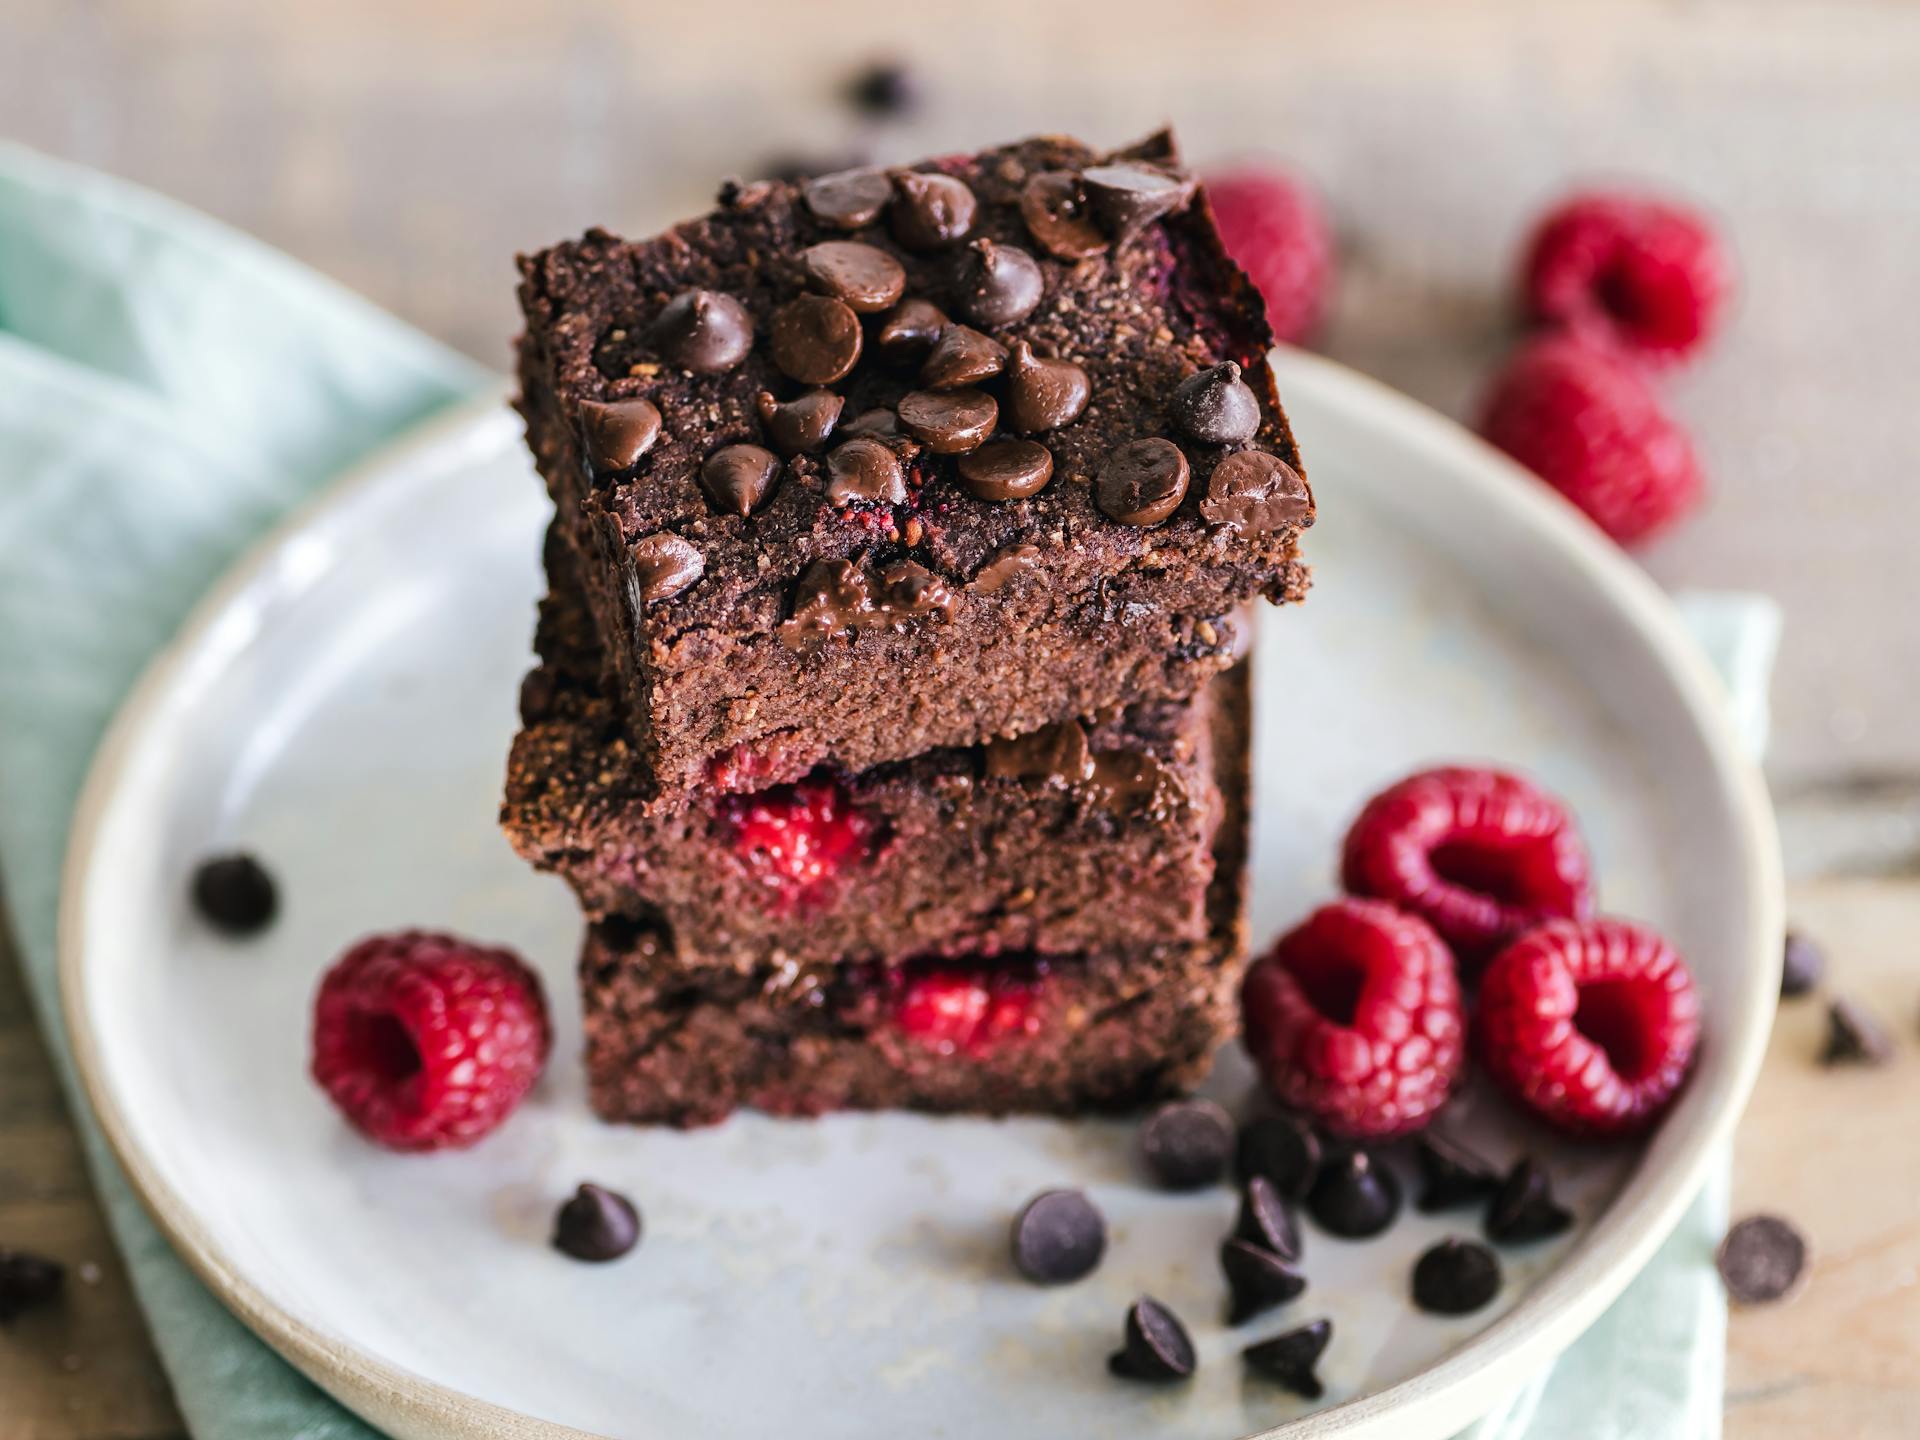 A close-up photo of stacked brownies | Source: Pexels